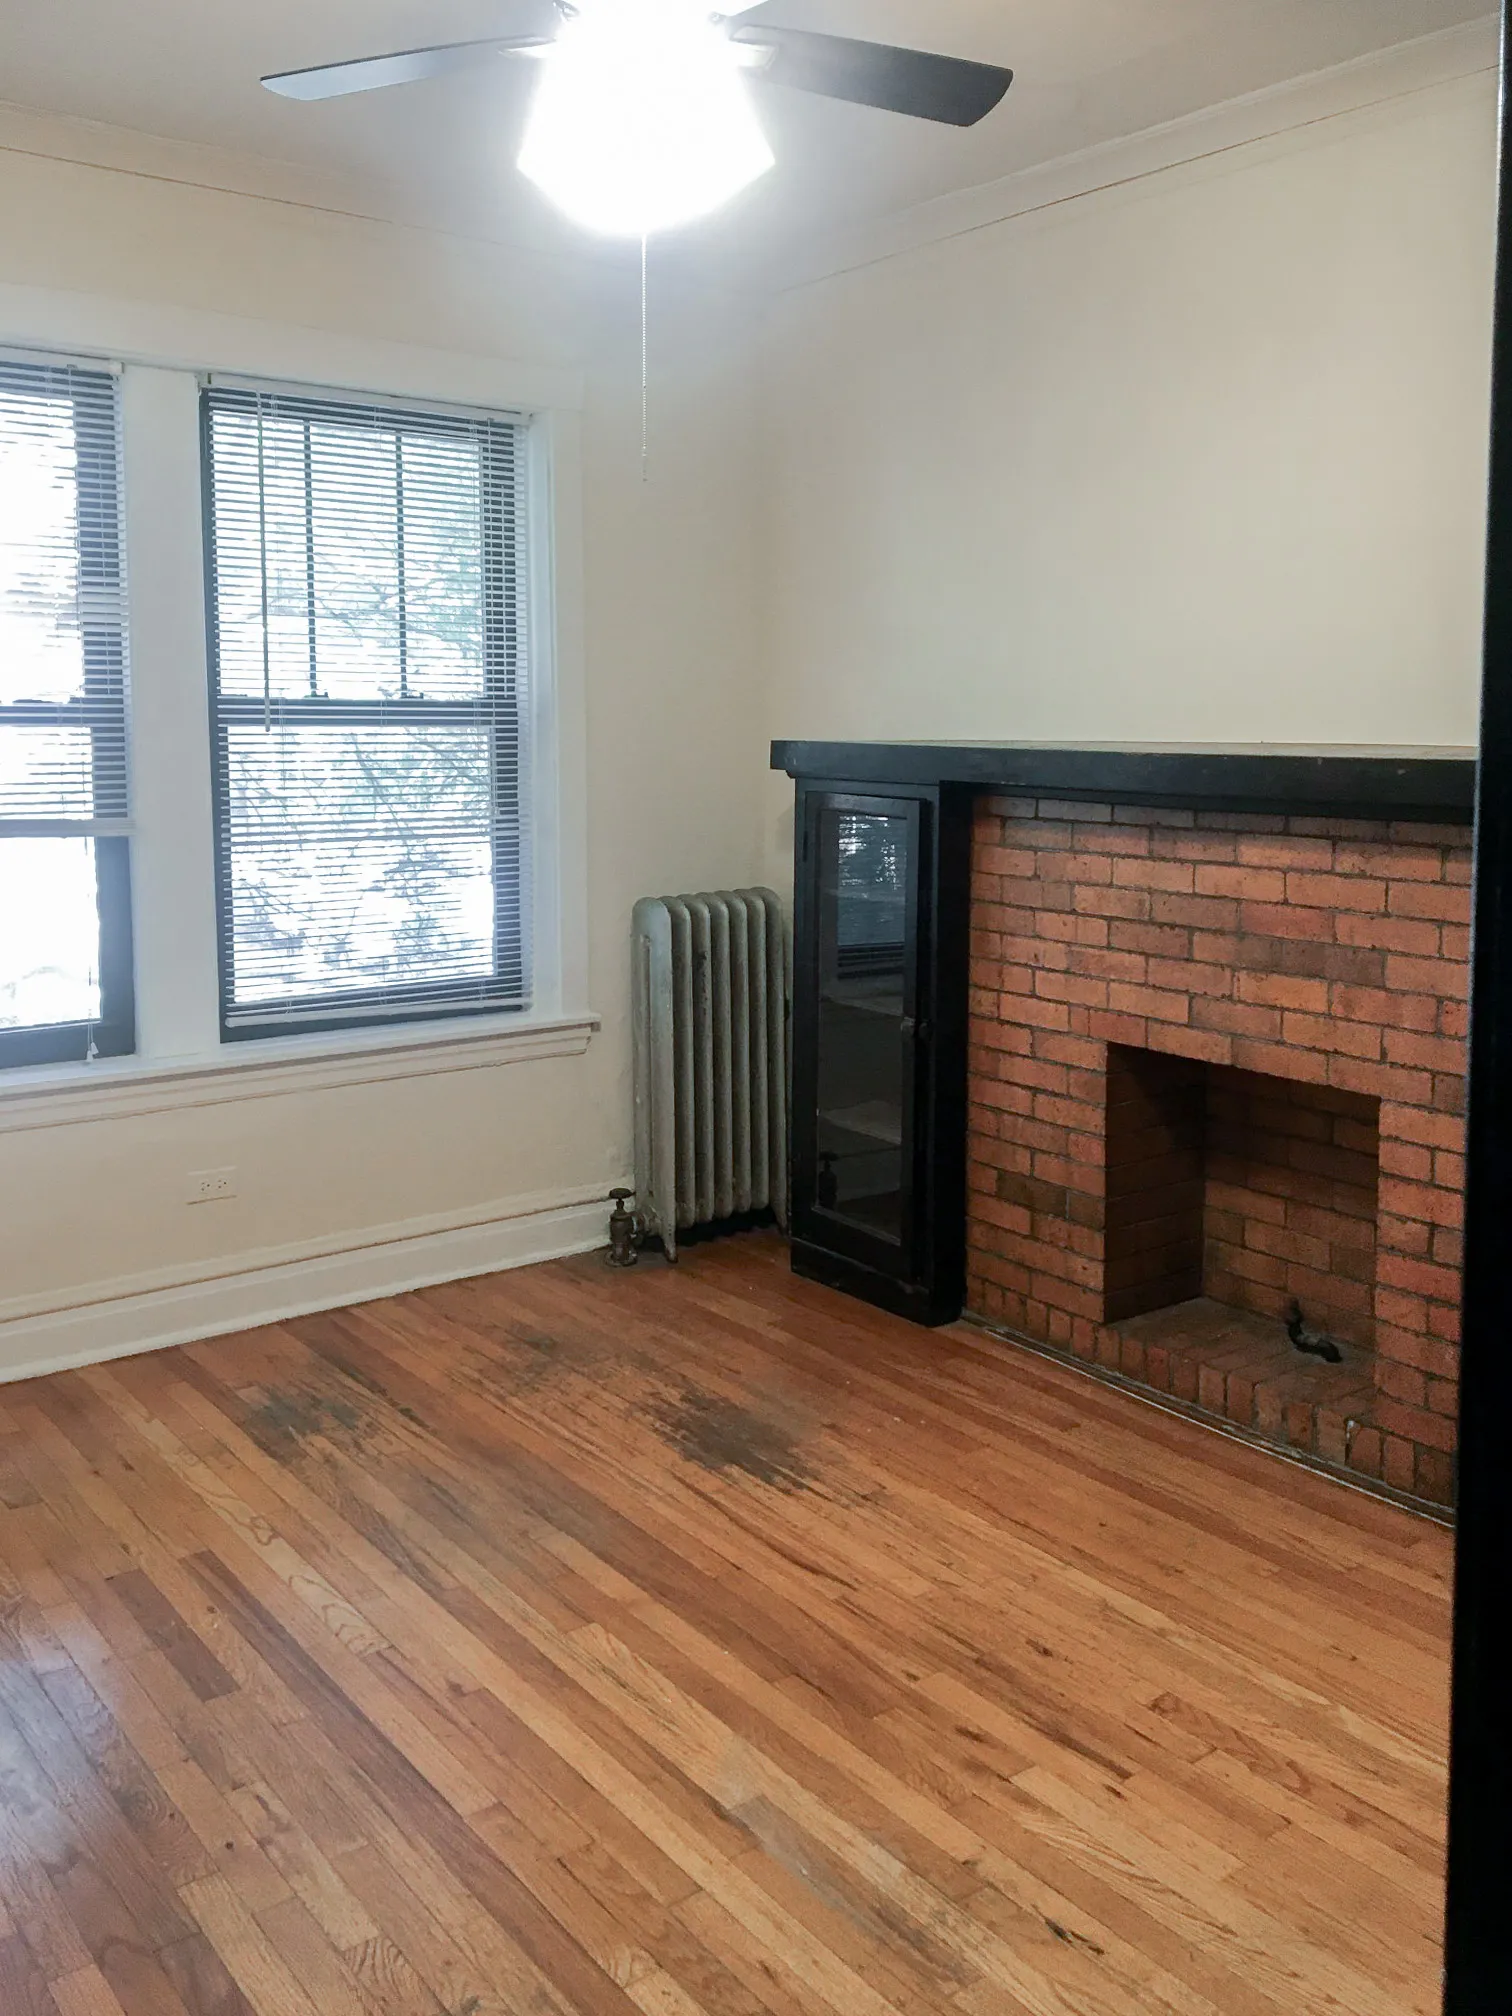 4844 N Rockwell St 60625 60625-unit#2-Chicago-IL